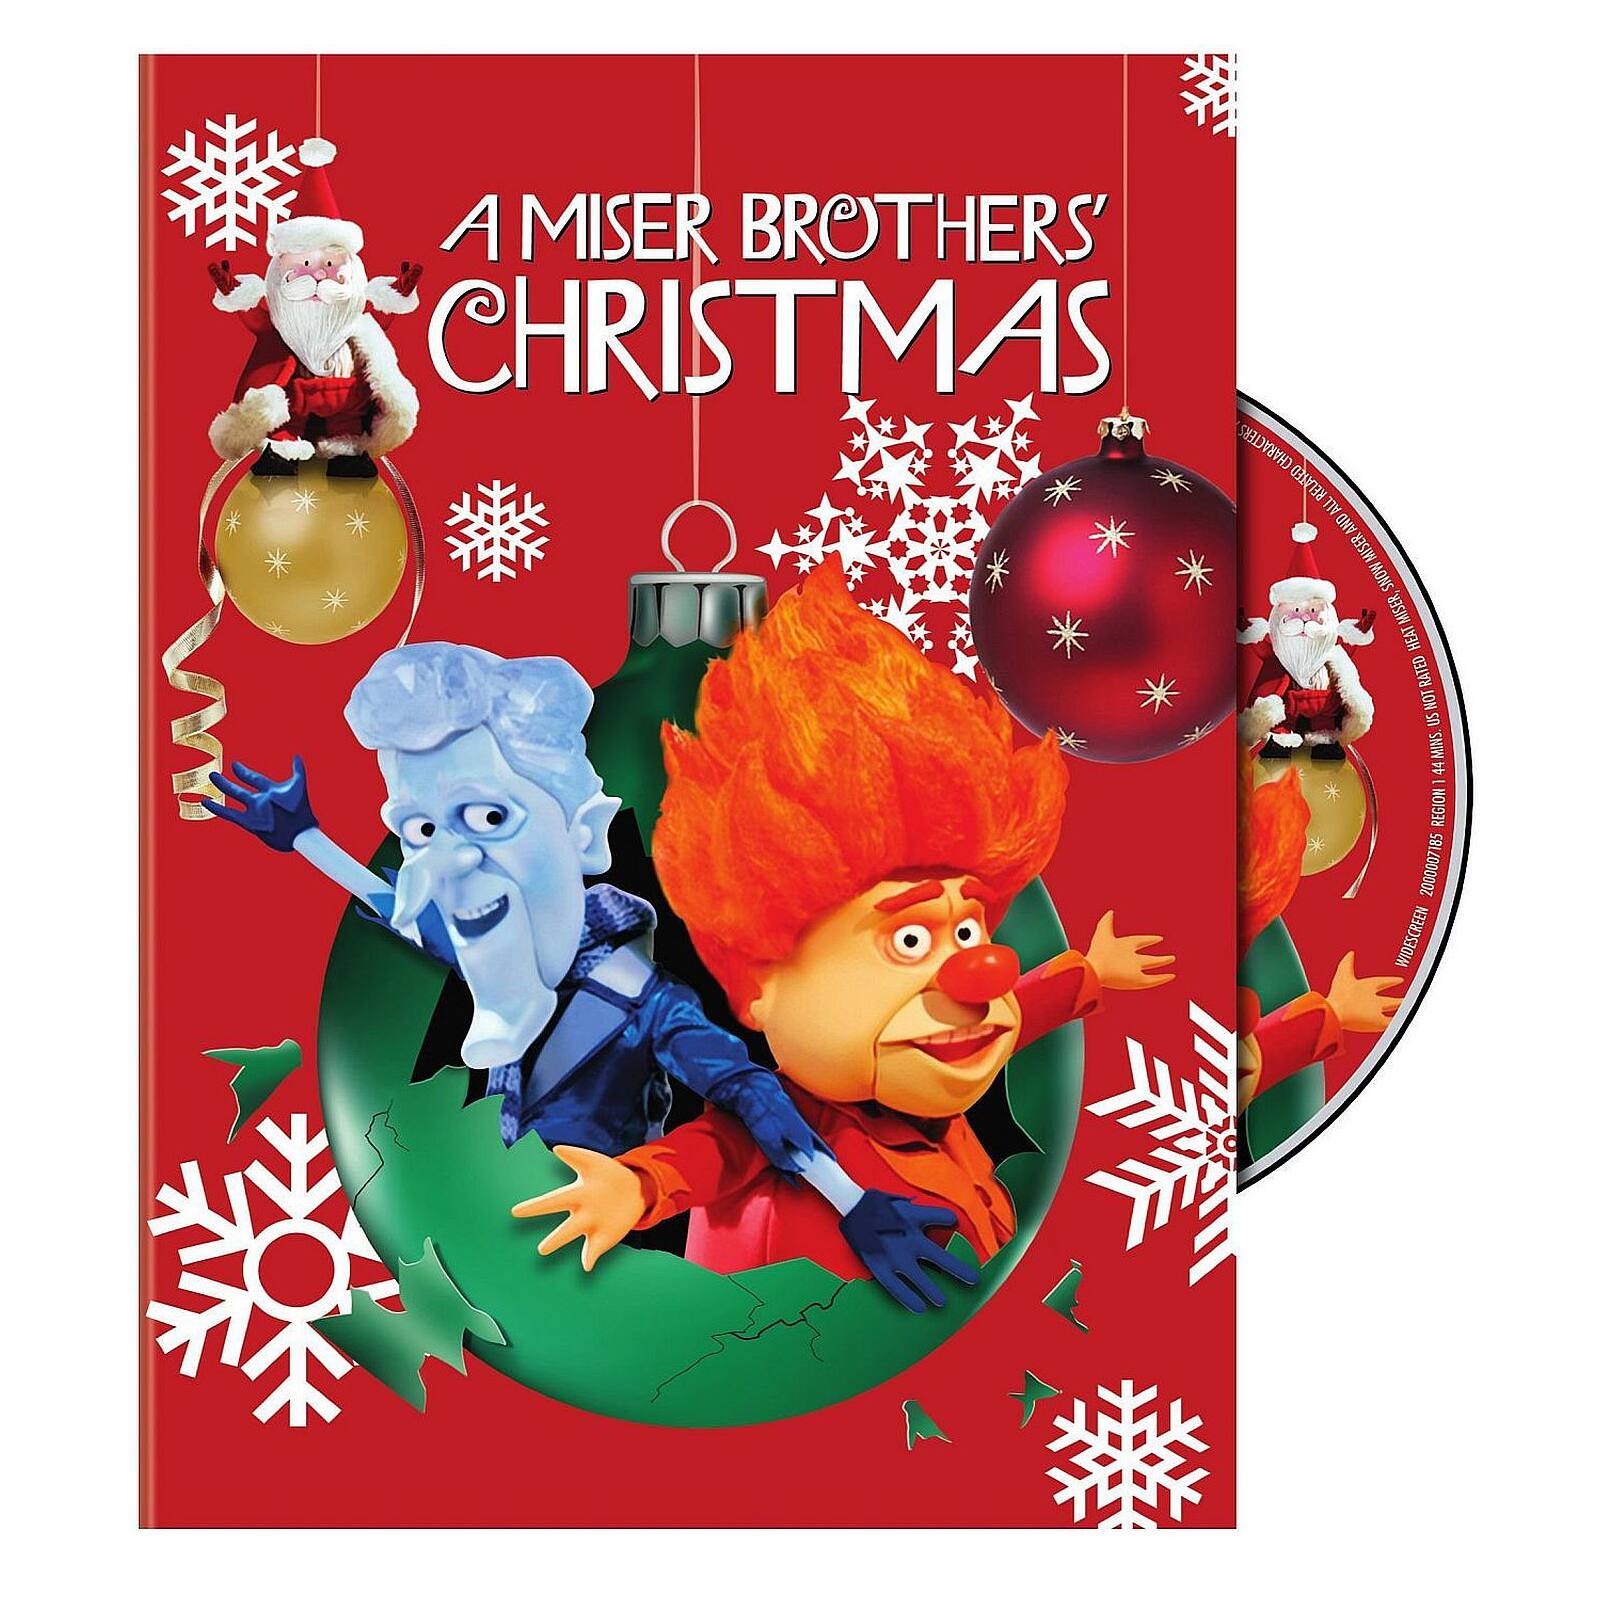 A Miser Brother's Christmas DVD